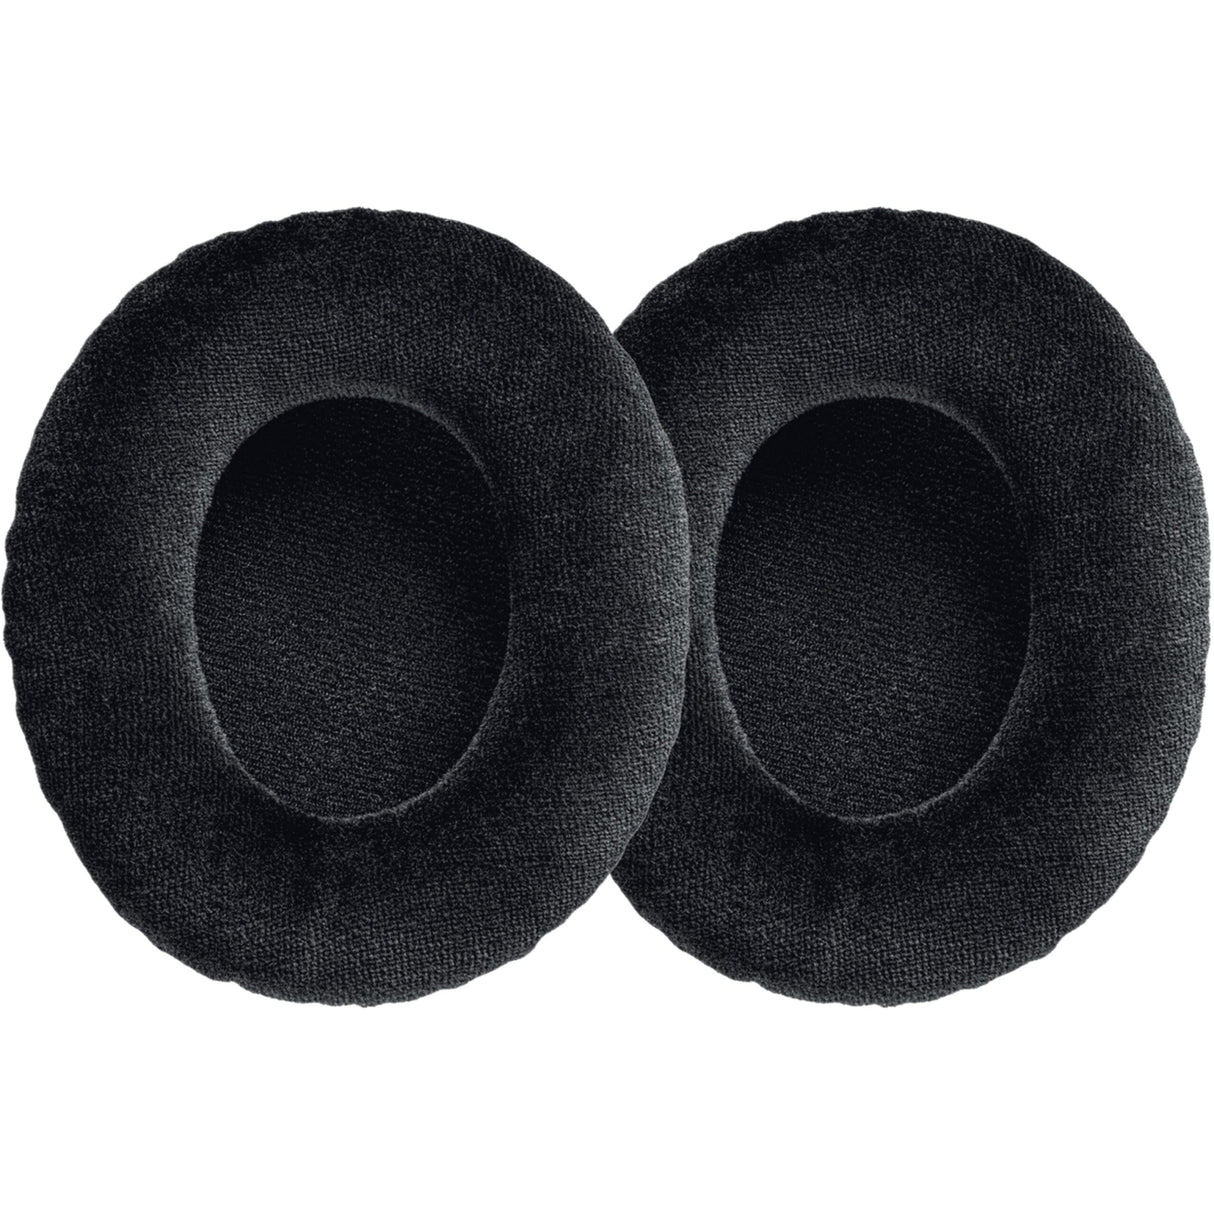 Shure HPAEC940 Replacement Velour Ear Cushions for SRH940